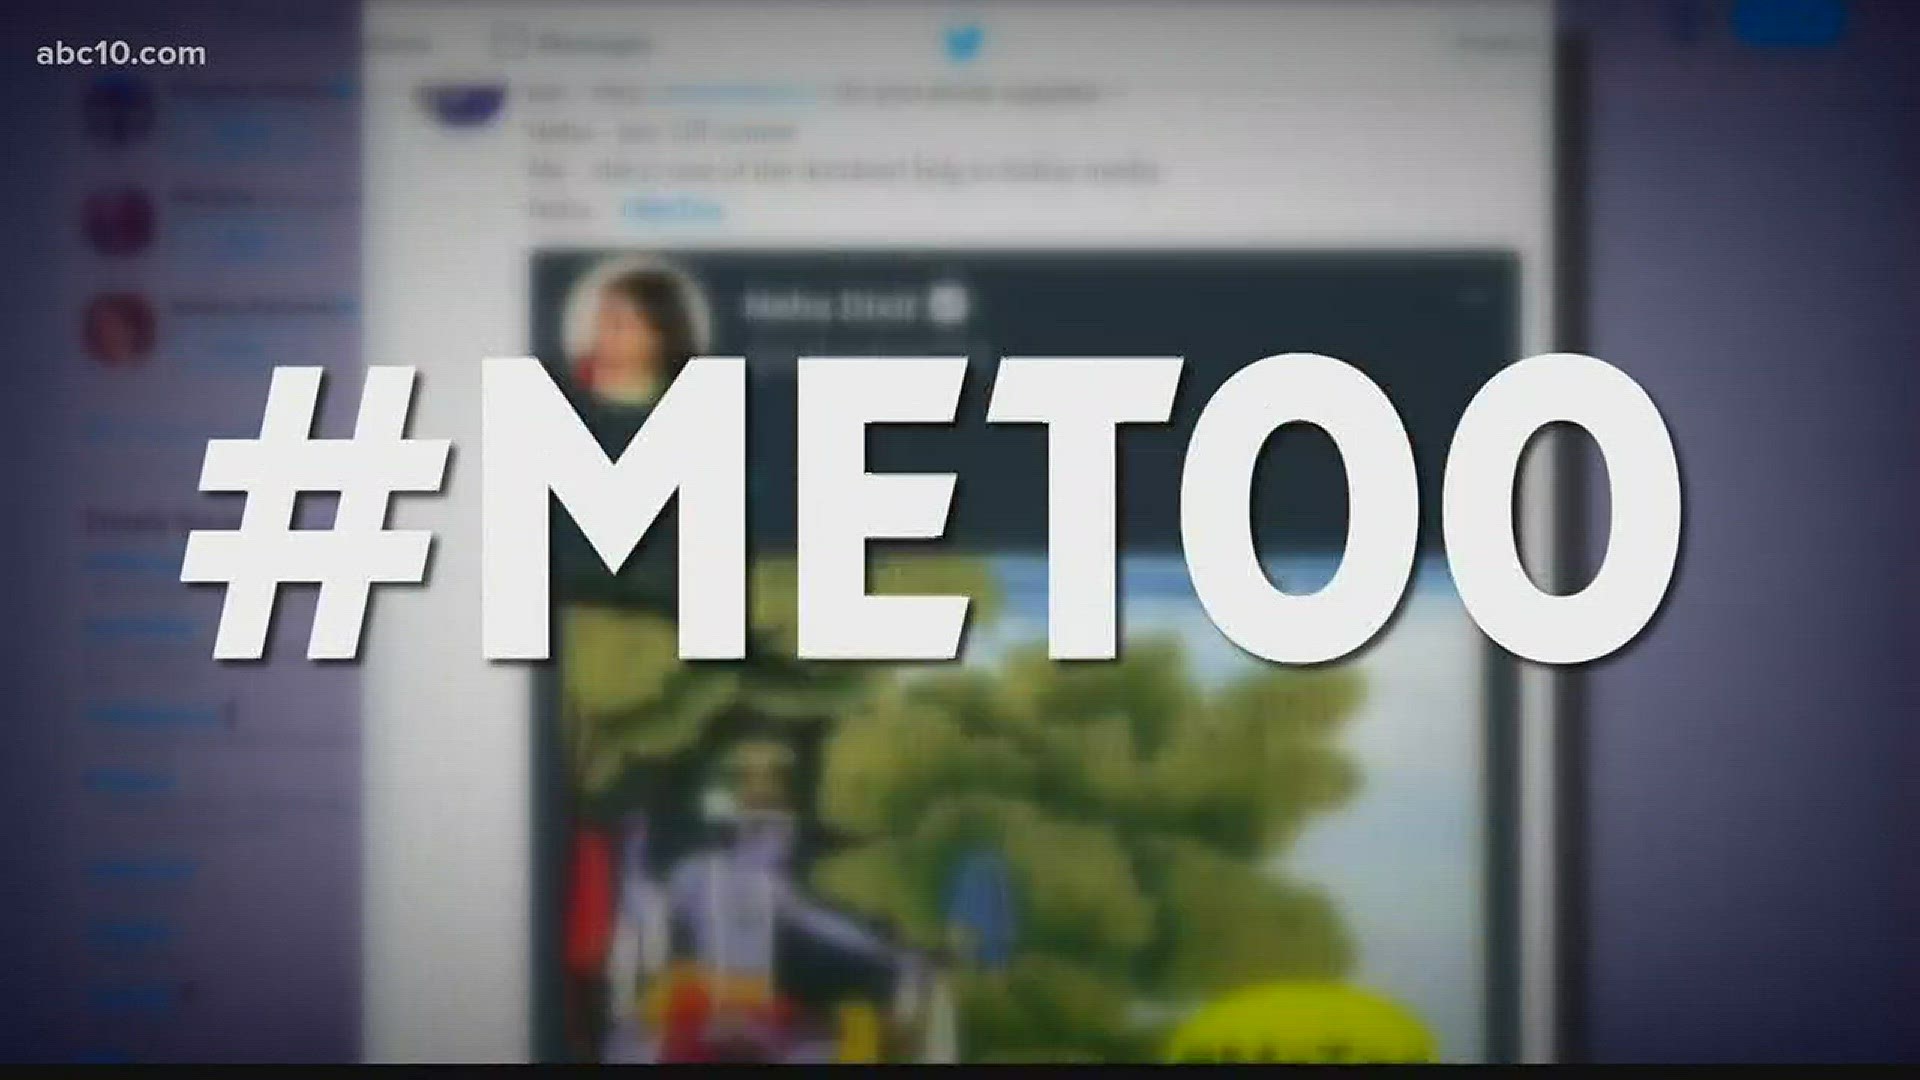 One Sacramento man felt compelled to speak out - and apologize - after seeing friend after friend post about sexual harassment on social media earlier this week.